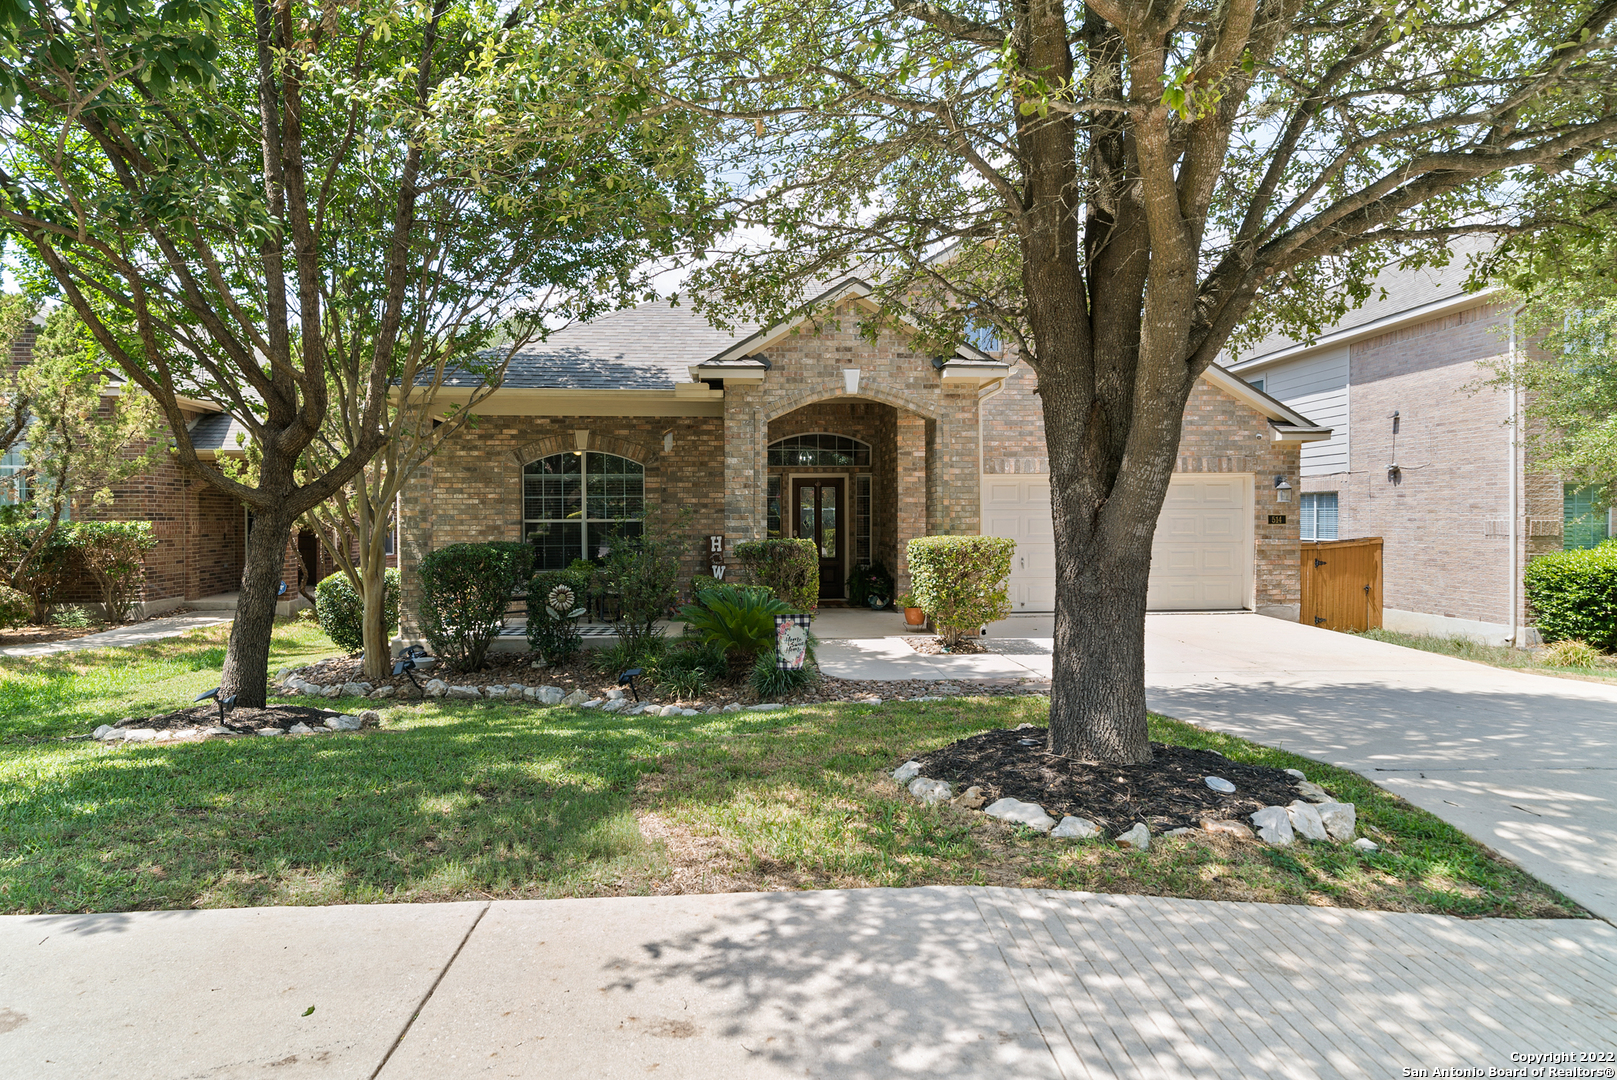 This home sits at the foot steps of the hill country in a highly desirable subdivision that is known for its beauty, friendly neighbors and a close community. The proud owners of this home have spared no expense in keeping this home updated and upgraded with some beautiful, timeless and custom touches. In 2019 the roof was fully replaced by Holden roofing, new front and back gutters were installed, and a bilevel composite deck and cedar pergola built, updated stainless steel five burner GE gas cooktop and microwave and installed laundry room cabinets with granite countertops.  Kitchen cabinets were installed by Kent Moore cabinets in 42 inch Alder wood cabinets w/ turn wood detailing, silestone countertops installed, crown moldings in the entry, foyer, master bed and bath, dining room and bedroom. LED lightbulbs throughout the house including automatic porch lights. In 2021 the downstairs guest bathroom was remodeled with all new fixtures, including replacing the tile, tub, toilet, faucets, countertops and fresh paint. New cabinets replaced & granite countertops installed, complete remodel of shower with a spa/rain feature and granite seat, frameless glass surround, installed a new freestanding tub, and light fixtures. TV mounts available in the game room, master bedroom, and guest bedroom. Wide- slat plantation shutters installed in masterbedroom and bath. Custom closet in master bath with drawers, shelving and tile floor. The HVAC interior and exterior system was replaced. Custom shelving installed in closet below the stairs for organization of toys, books, or crafts. Updated ceiling fans, new light fixtures with LED bulbs in entry, foyer, dining room and breakfast room. Home is plumbed for a water softener and drinking water purifier. In 2022 a new garbage disposal installed and new stainless steel GE dishwasher and new sod laid out back.  Huge game room/media room sits alone in the upstairs w/ a half bath.  This is the only room w/ carpet. 4th bedroom used as an office but can be used as a bedroom if you change out the glass doors.   The home is move in ready.  Home backs up to a greenbelt with lots of mature trees.  Stonewall Ranch has easy access to IH10 with plenty of shopping and restaurants all around.  Easy, fast access to HEB, Walmart, La Cantera, Fiesta Texas, The Rim, Paladium Imax Theater, Lifetime Fitness and many more.  There is a beautiful community pool, clubhouse and playground in walking distance for your family to enjoy.  Great school district with high rated elementary, middle and high schools that feed into this community.  You are minutes away from some amazing hiking at Friedrich Wilderness Park.You will not be disappointed in this home, subdivision or location.  Book your appointment now.